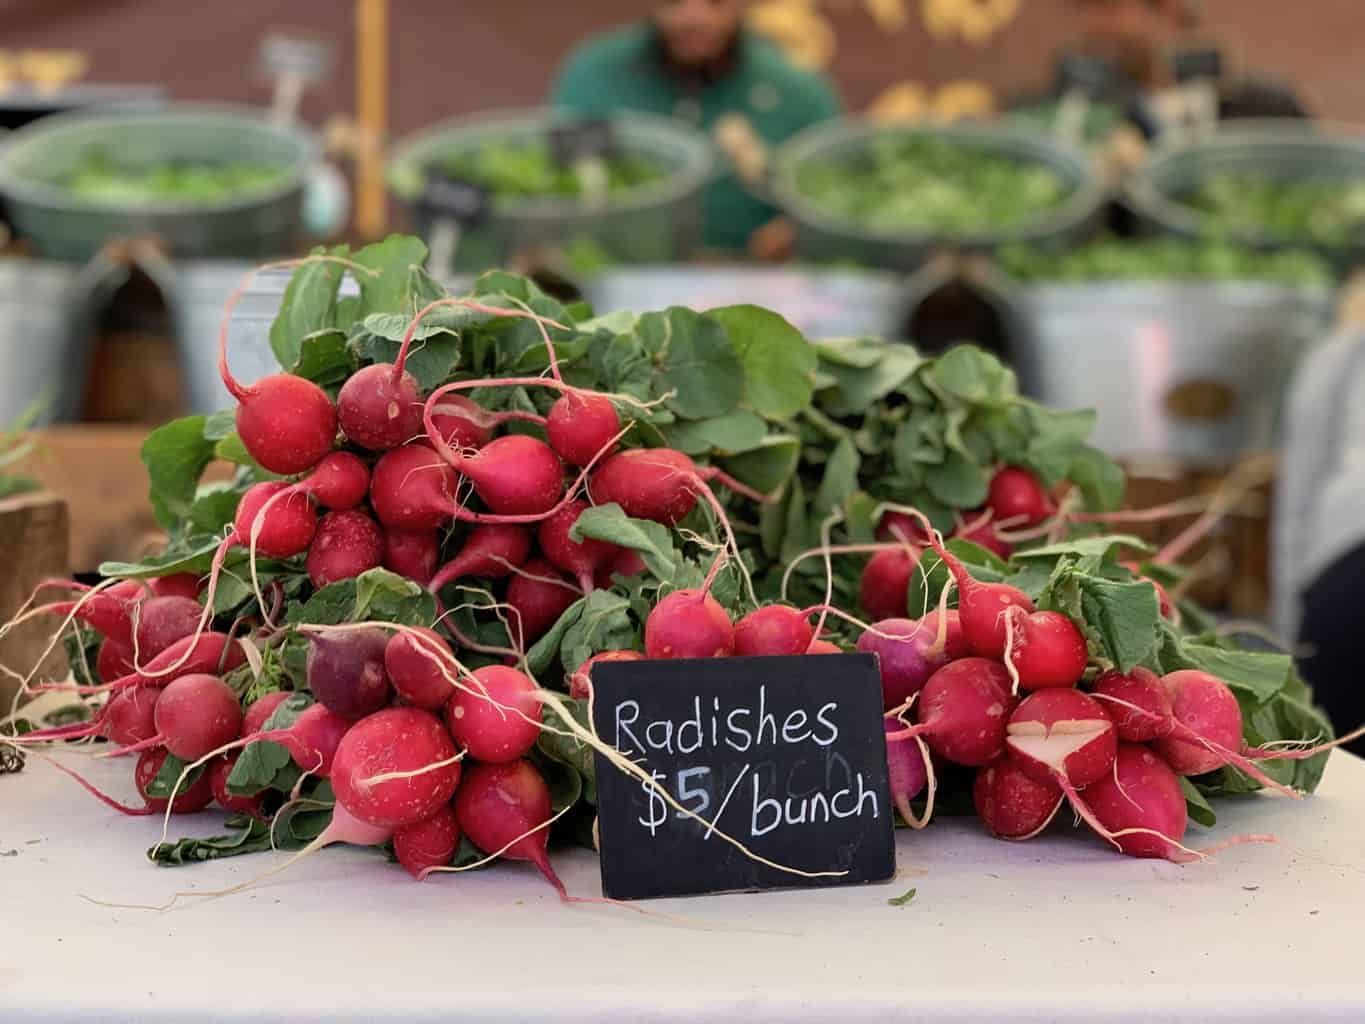 Radishes from Black Cat Farm in Boulder, Colorado at the Farmers' Market